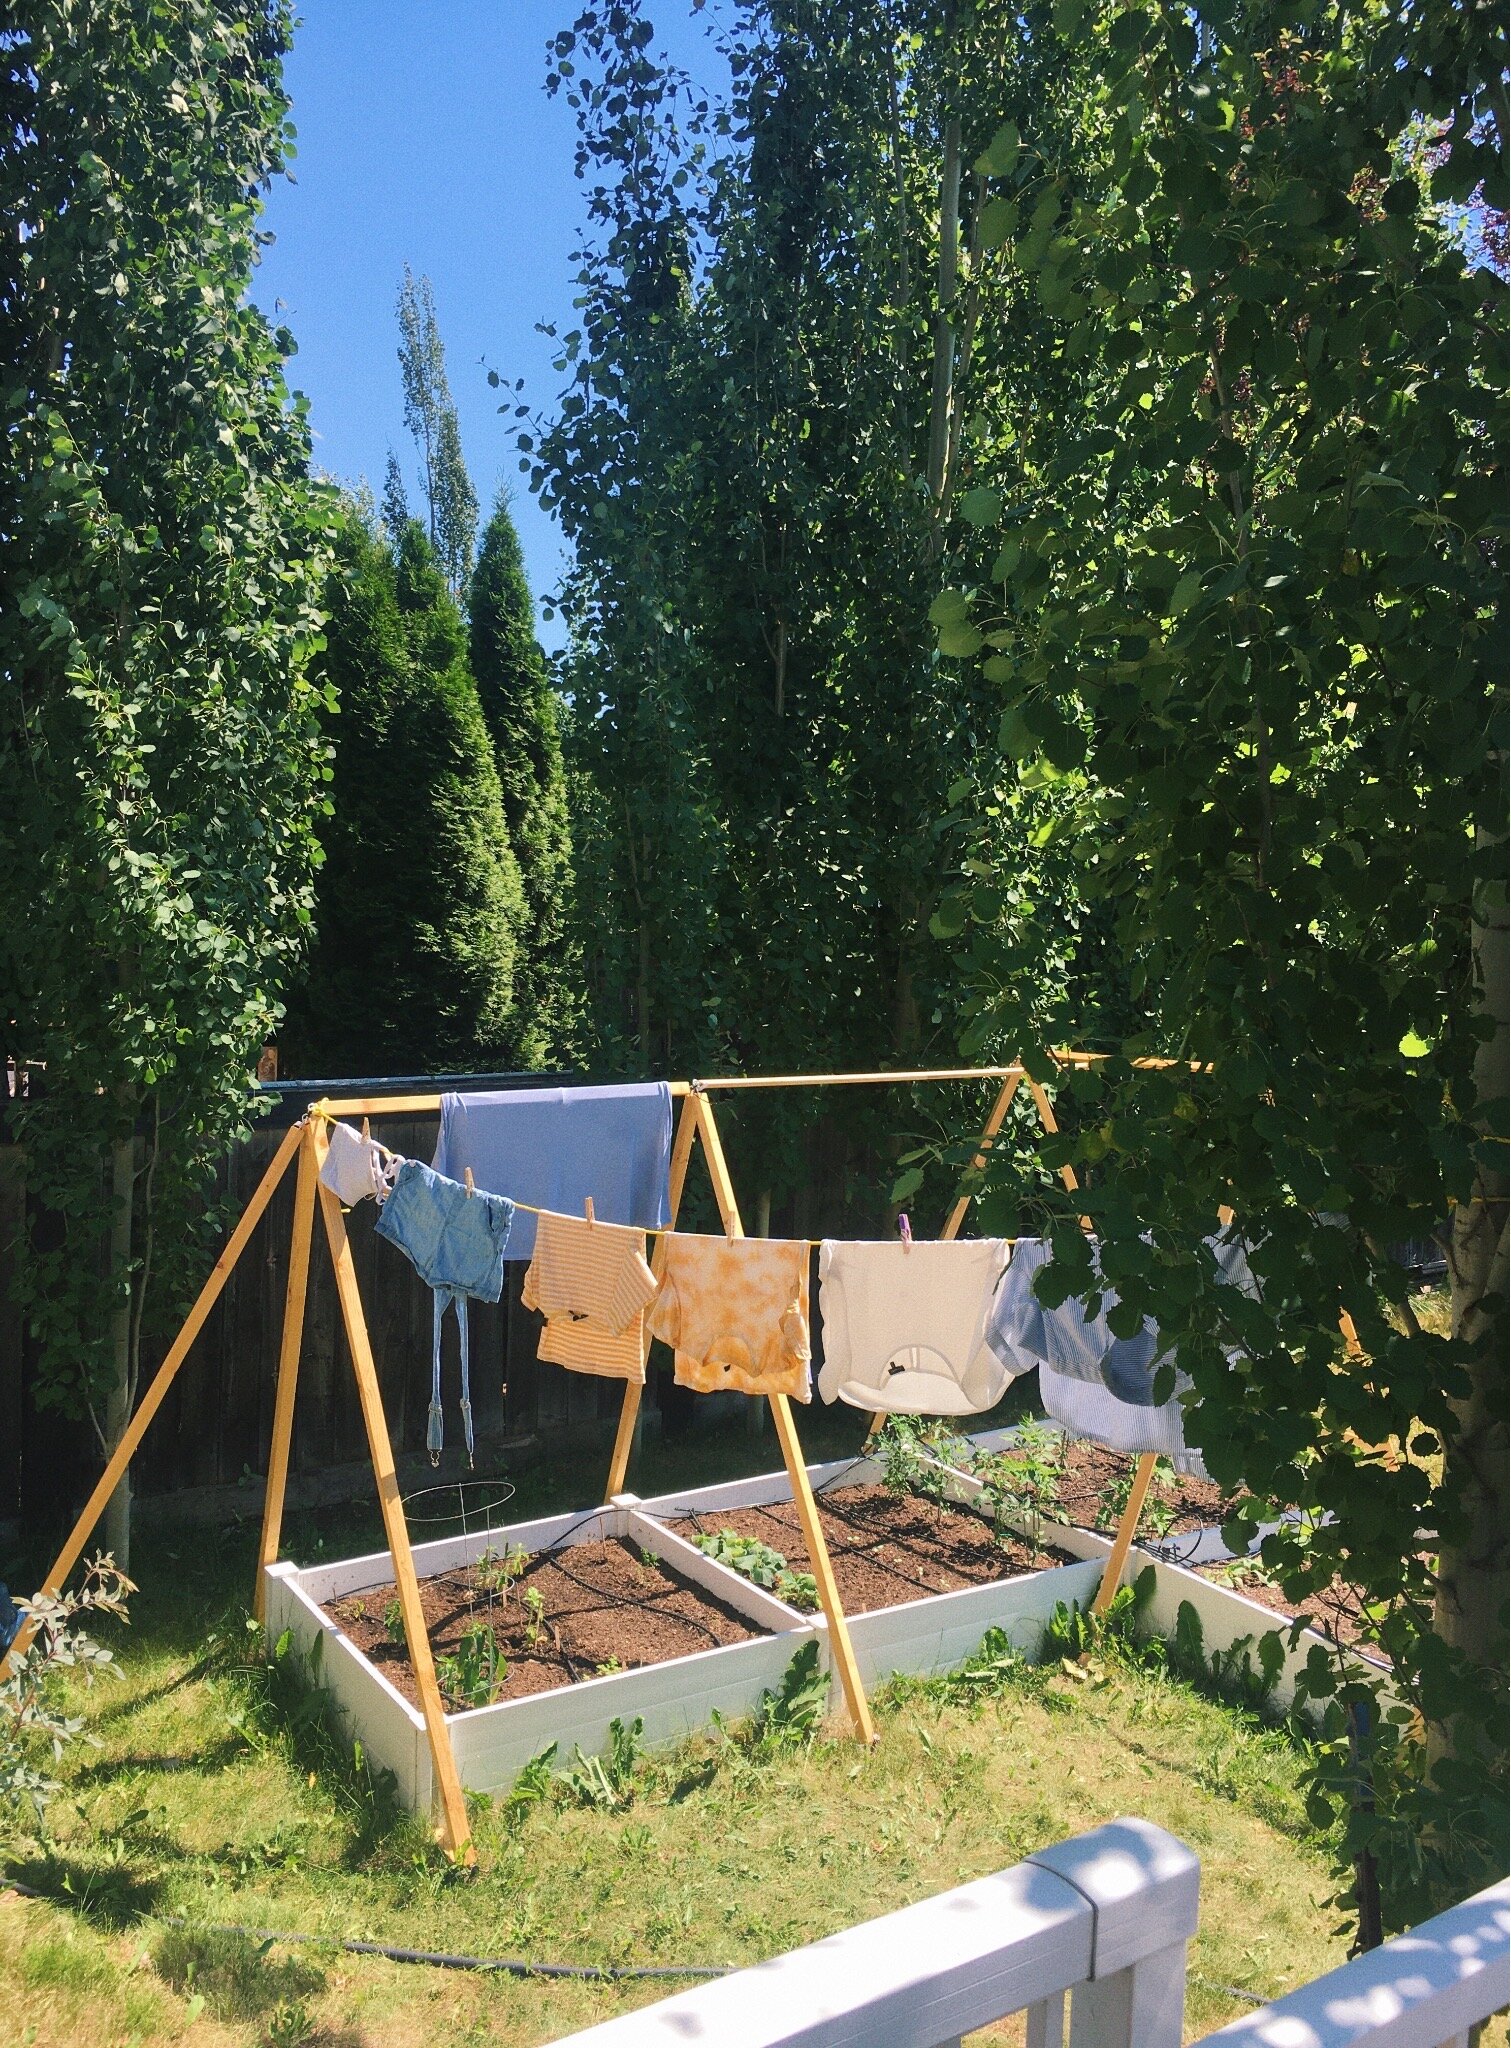 Getting stuff done and enjoying the sun whenever I can. Image description: A clothesline hangs over white garden beds with vegetable plants in them. The background is trees and a blue sky.